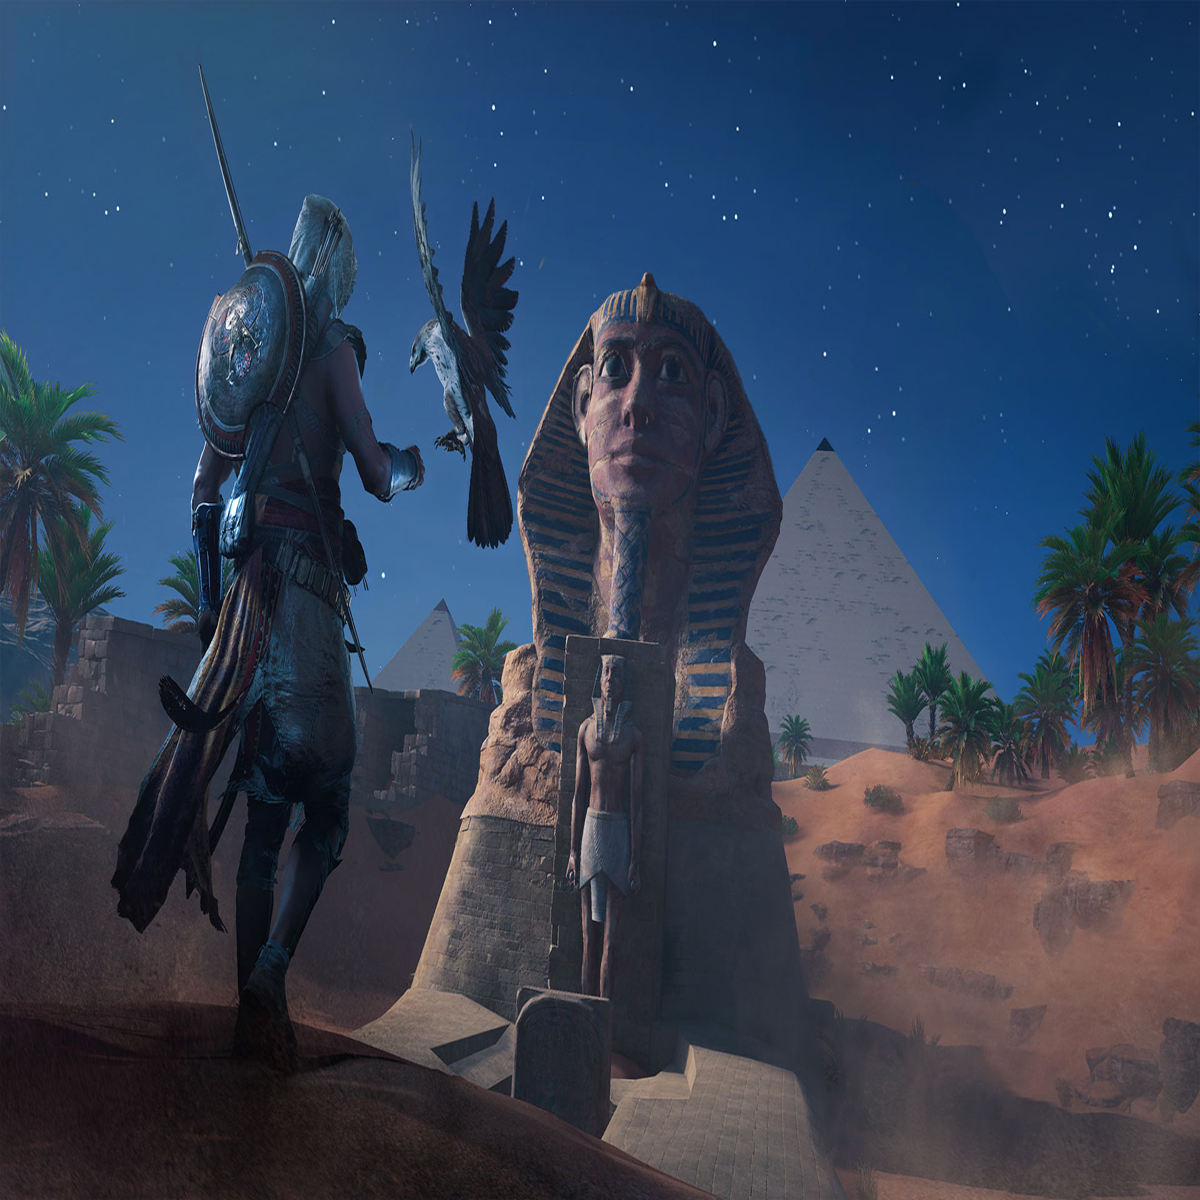 Assassin's Creed Origins: 12 New Gameplay Features You Need To Know – Page 3